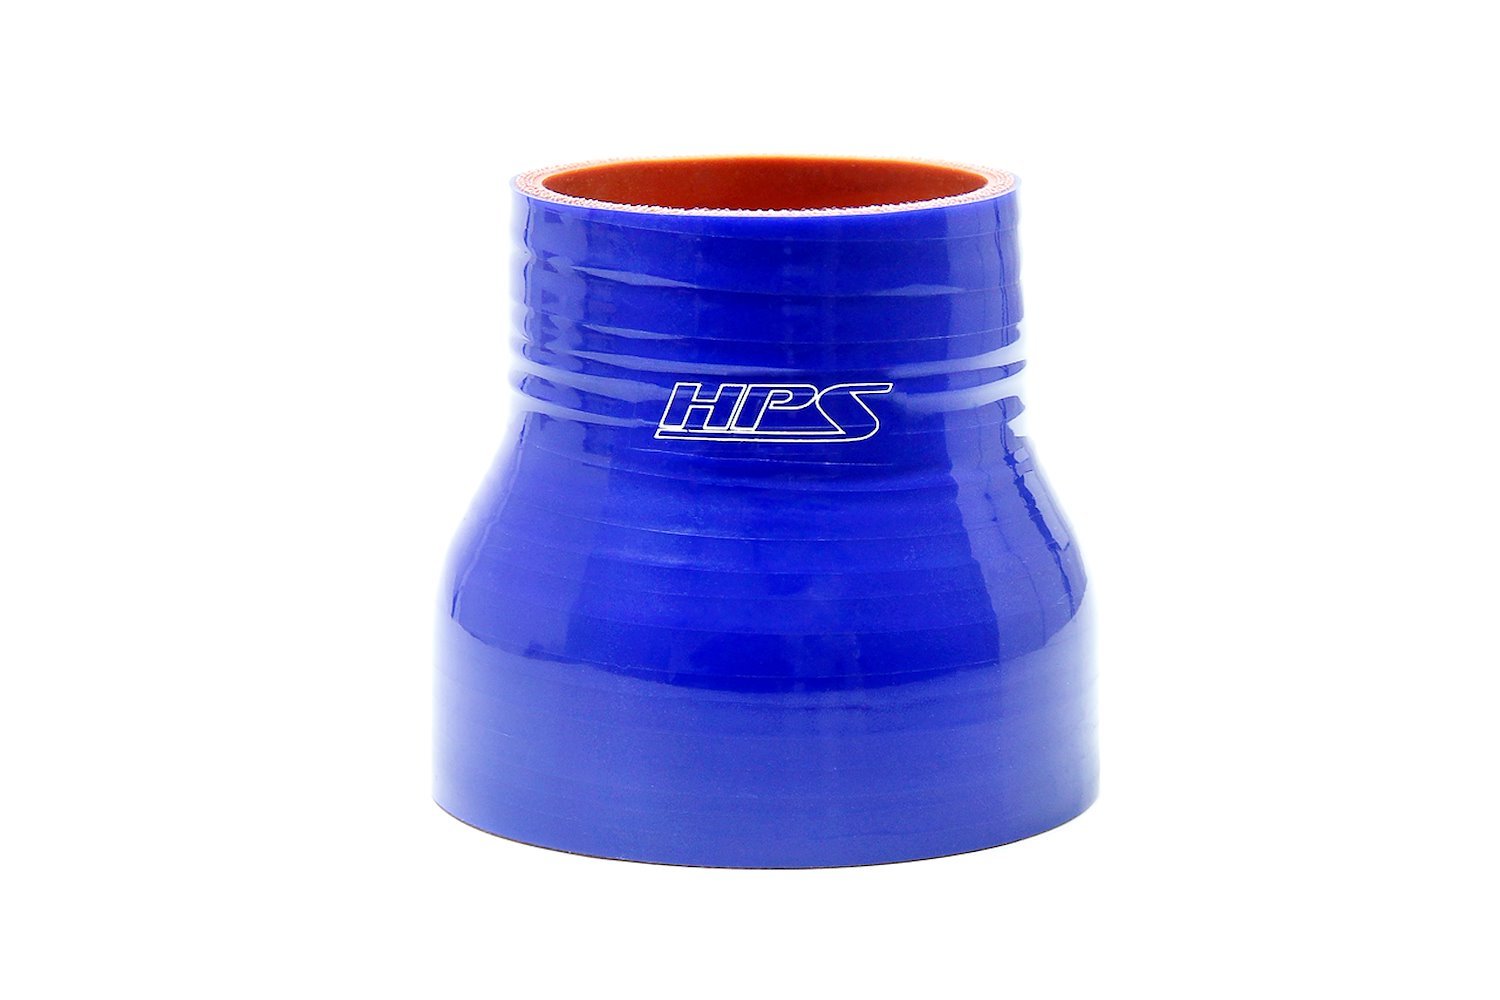 HTSR-275-300-L6-BLUE Silicone Reducer Hose, High-Temp 4-Ply Reinforced, 2-3/4 in. - 3 in. ID, 6 in. Long, Blue